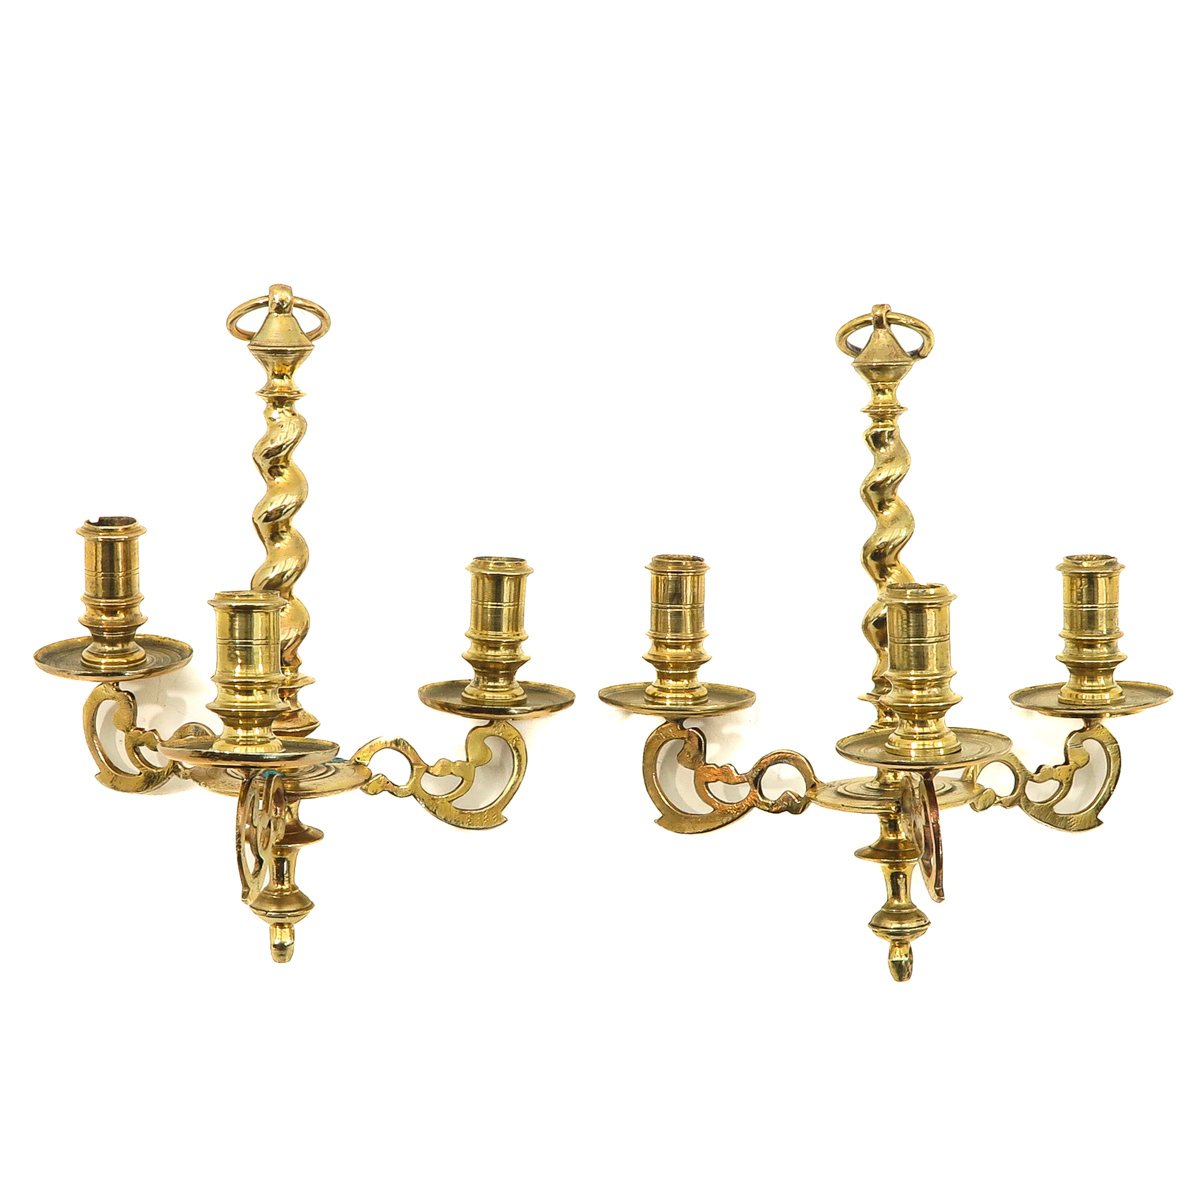 A Pair of 17th Century Candle Chandeliers - Image 4 of 8